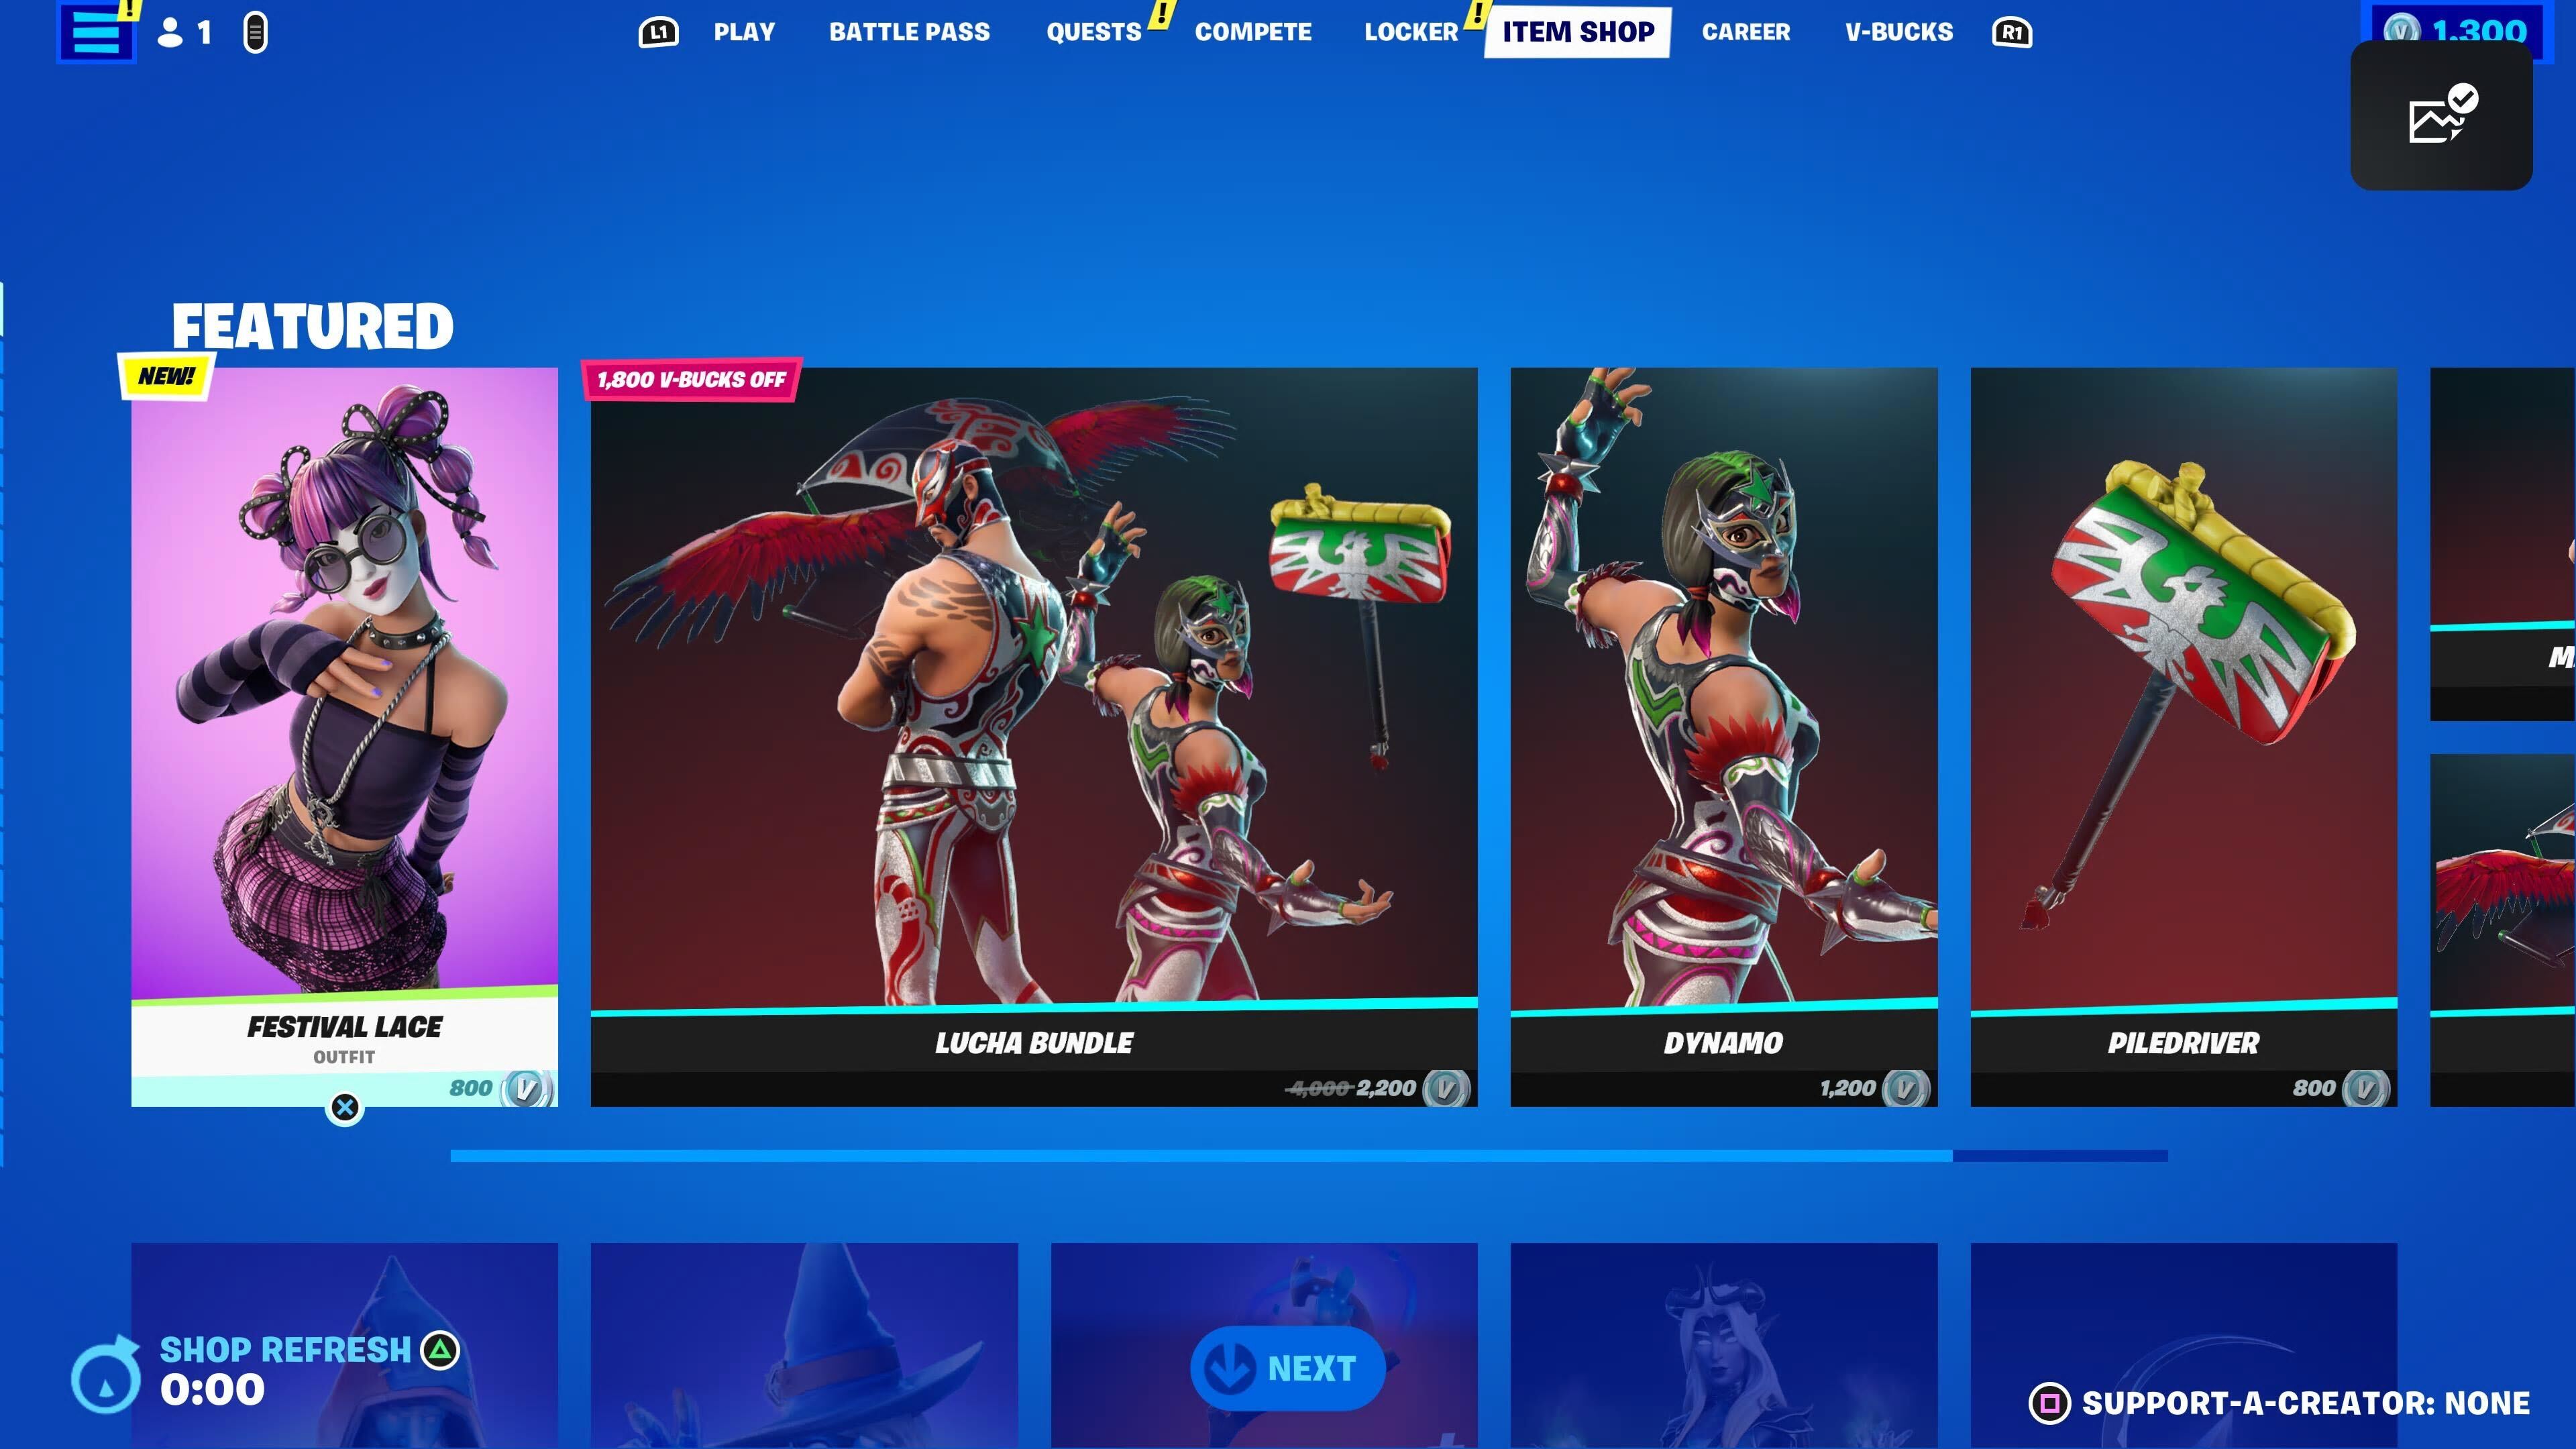 Fortnite's Festival Lace skin Cost, release date, and bundle info